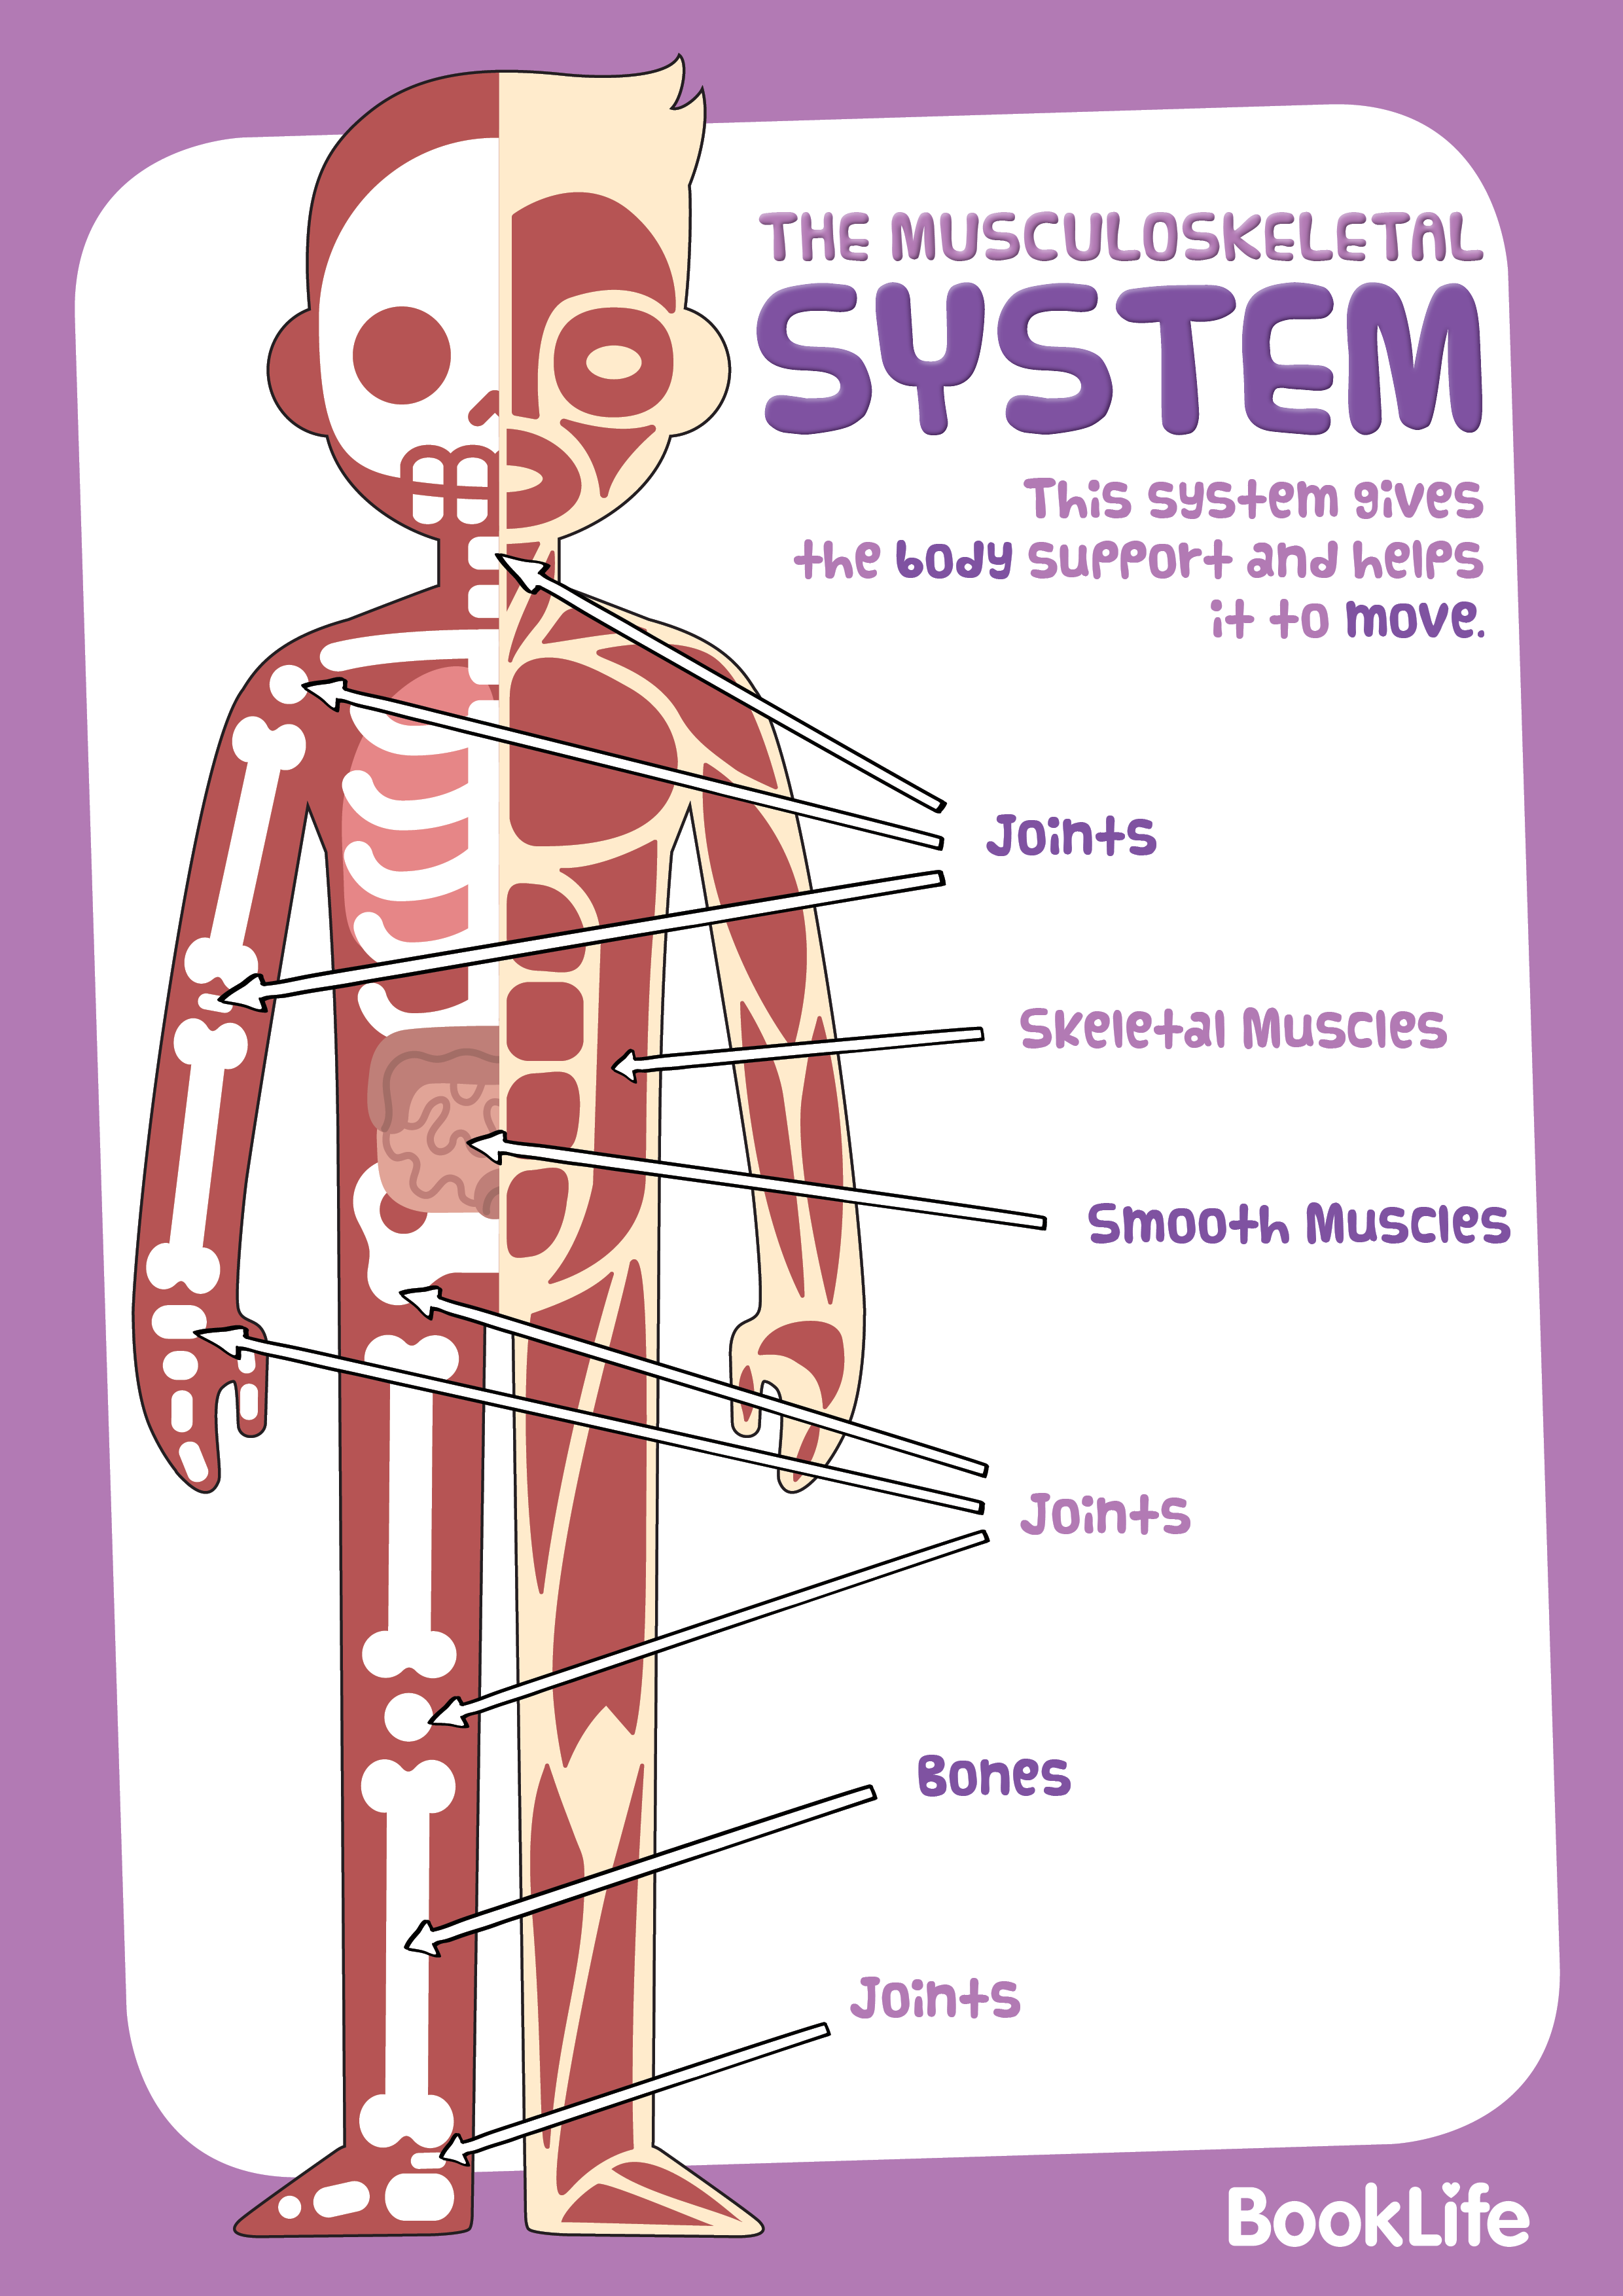 Free Human Body System Poster - Muscloskeletal by BookLife